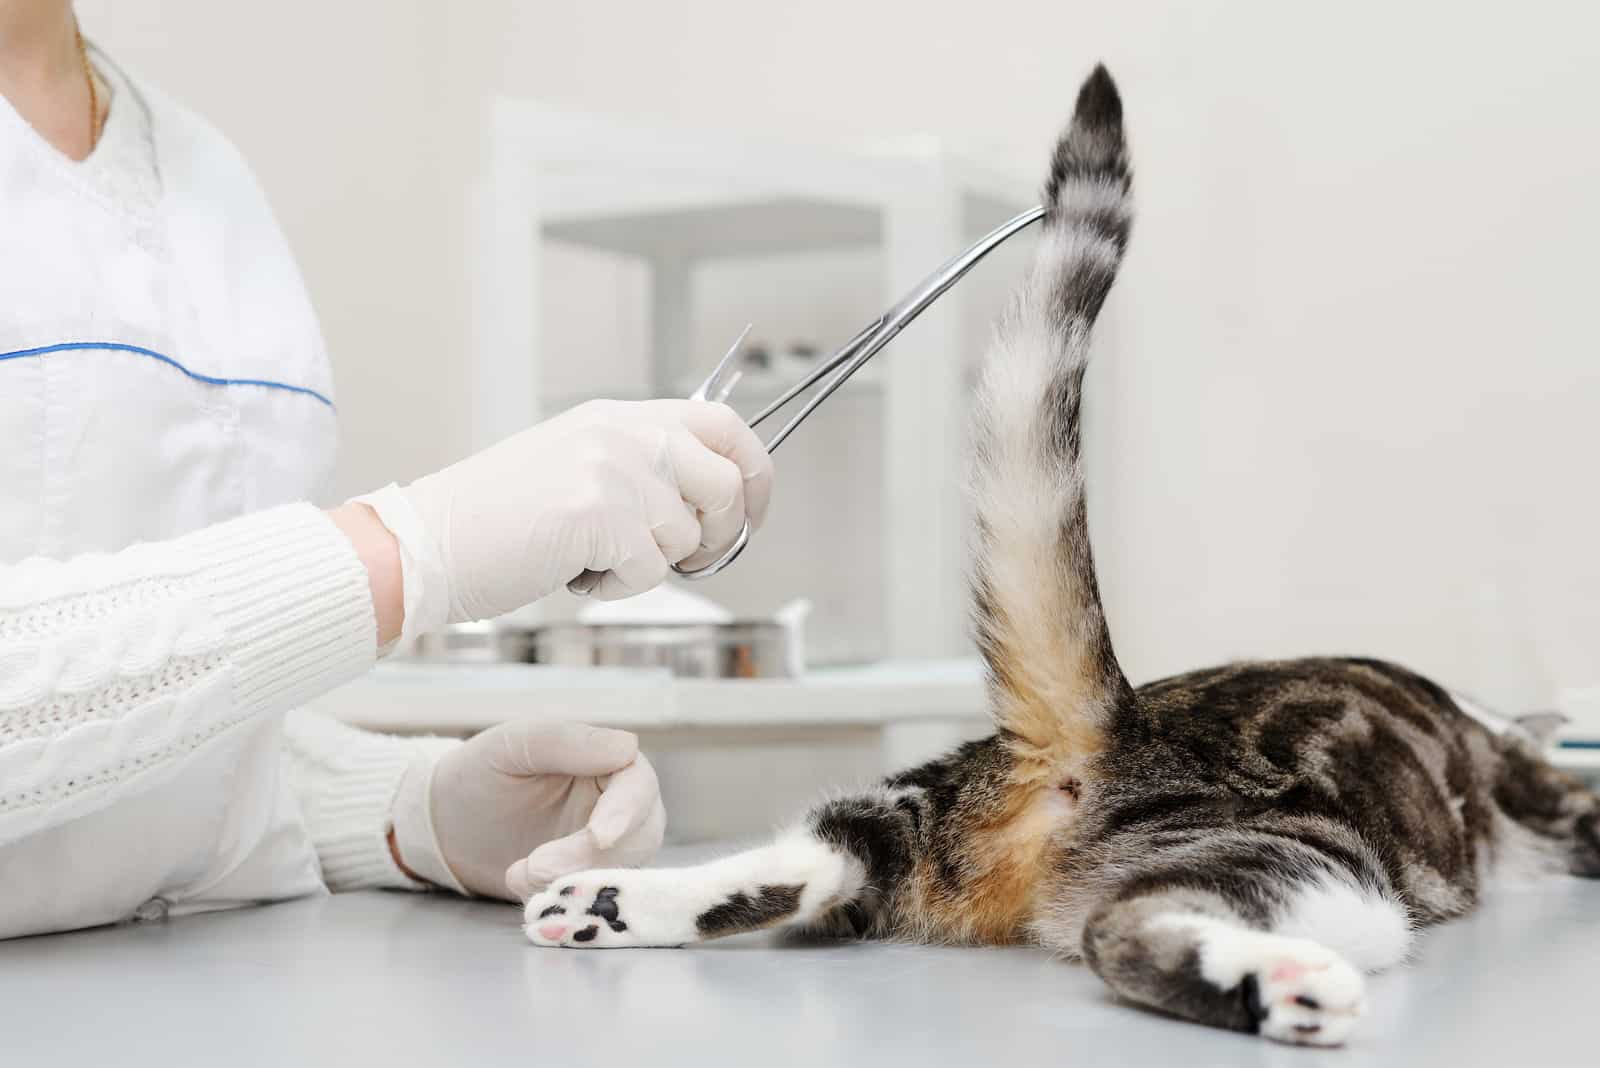 the vet examines the cat's tail